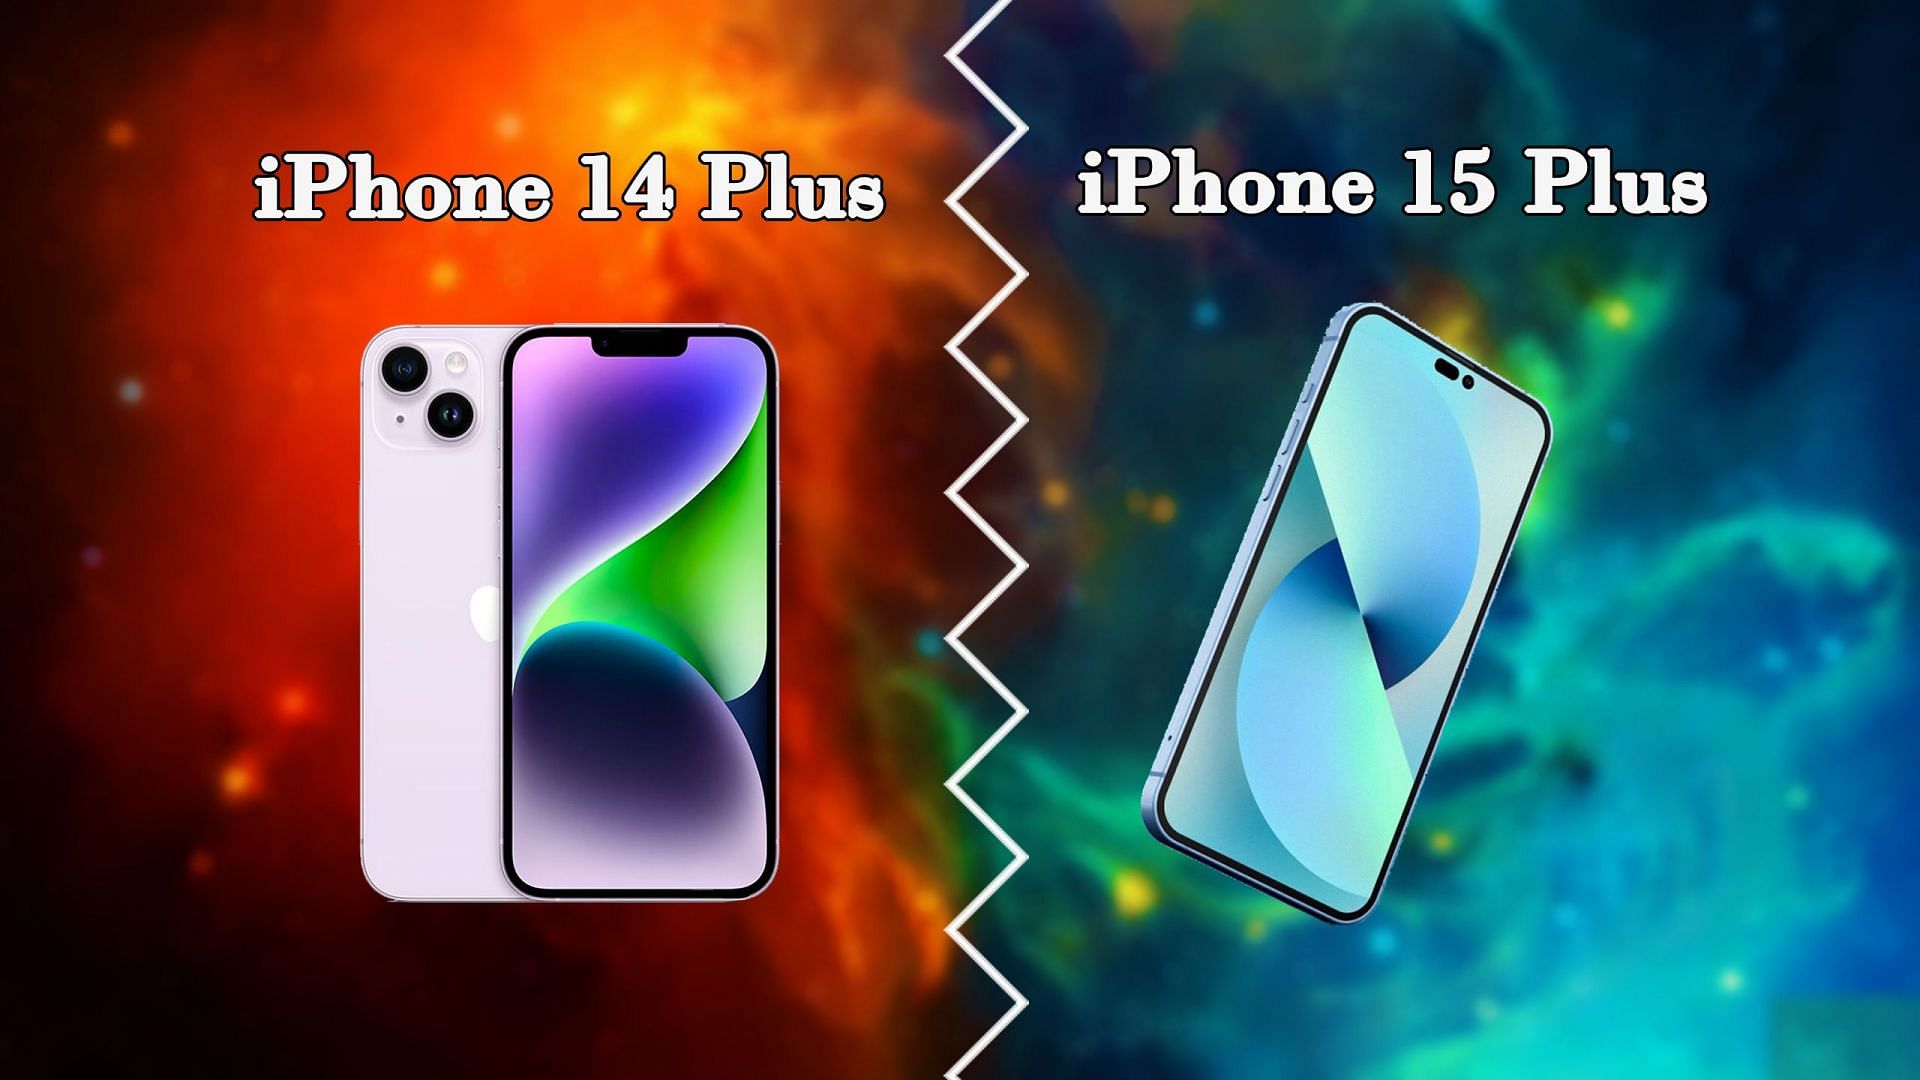 iPhone 14 Plus vs iPhone 15 Plus: Which smartphone is better? - Reviewed